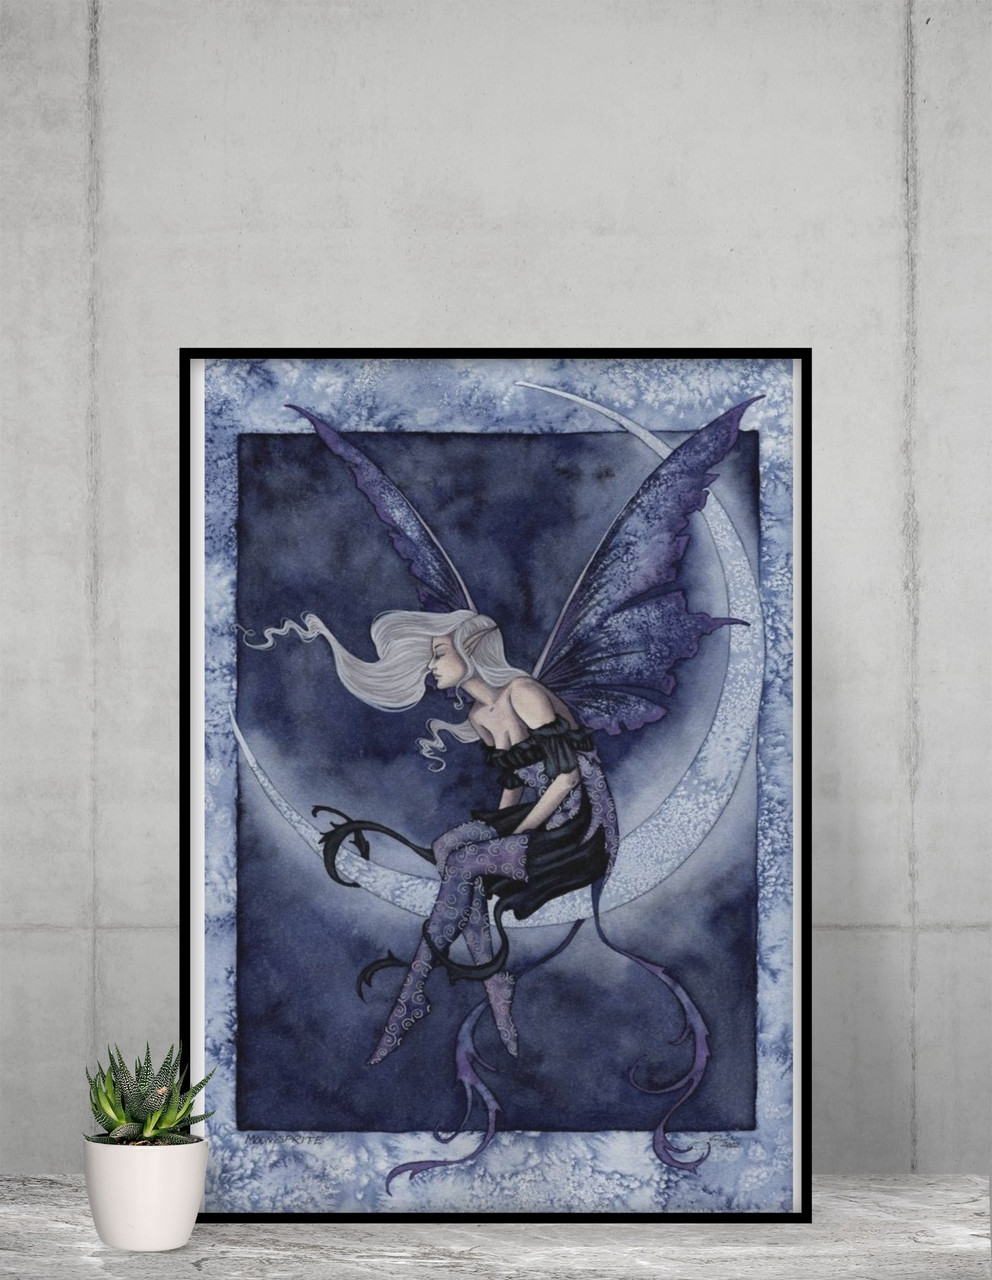 Purple Fairy Wall Art Poster Fairycore Grunge Room Decor Home Office Wall  Decor Aesthetic Room Cottagecore Fairy Moon Sitting Vintage Teen Room  Gothic Witchy Cool Wall Decor Art Print Poster 12x18 